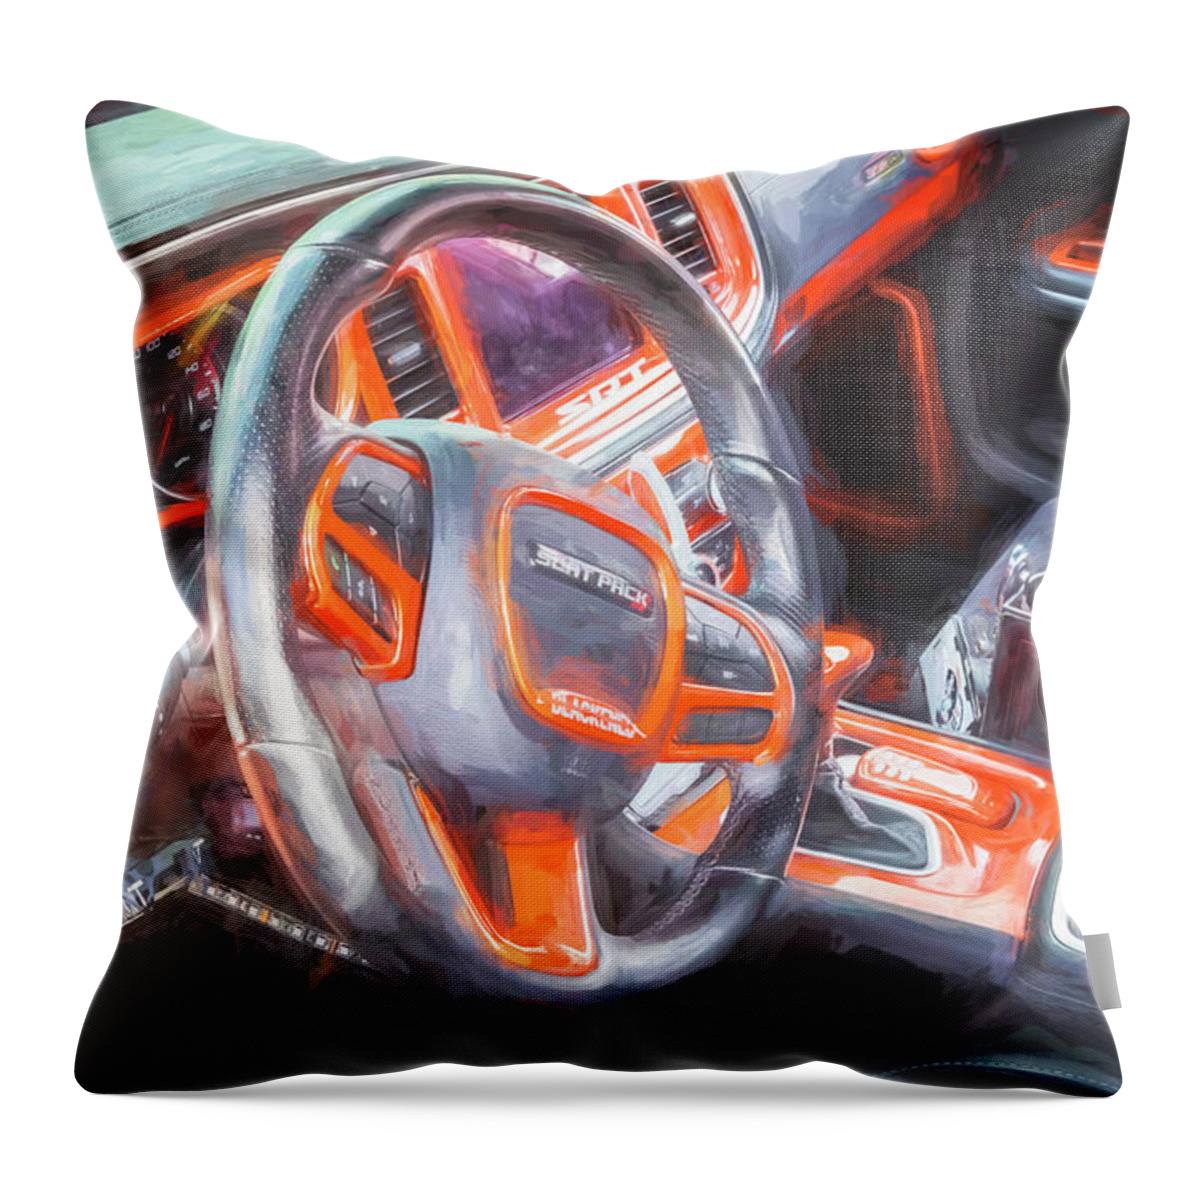 The 2022 Go Mango Orange Dodge Charger Scat Pack Srt 392 Throw Pillow featuring the photograph 2022 Go Mango Orange Dodge Charger Scat Pack SRT 392 X105 by Rich Franco